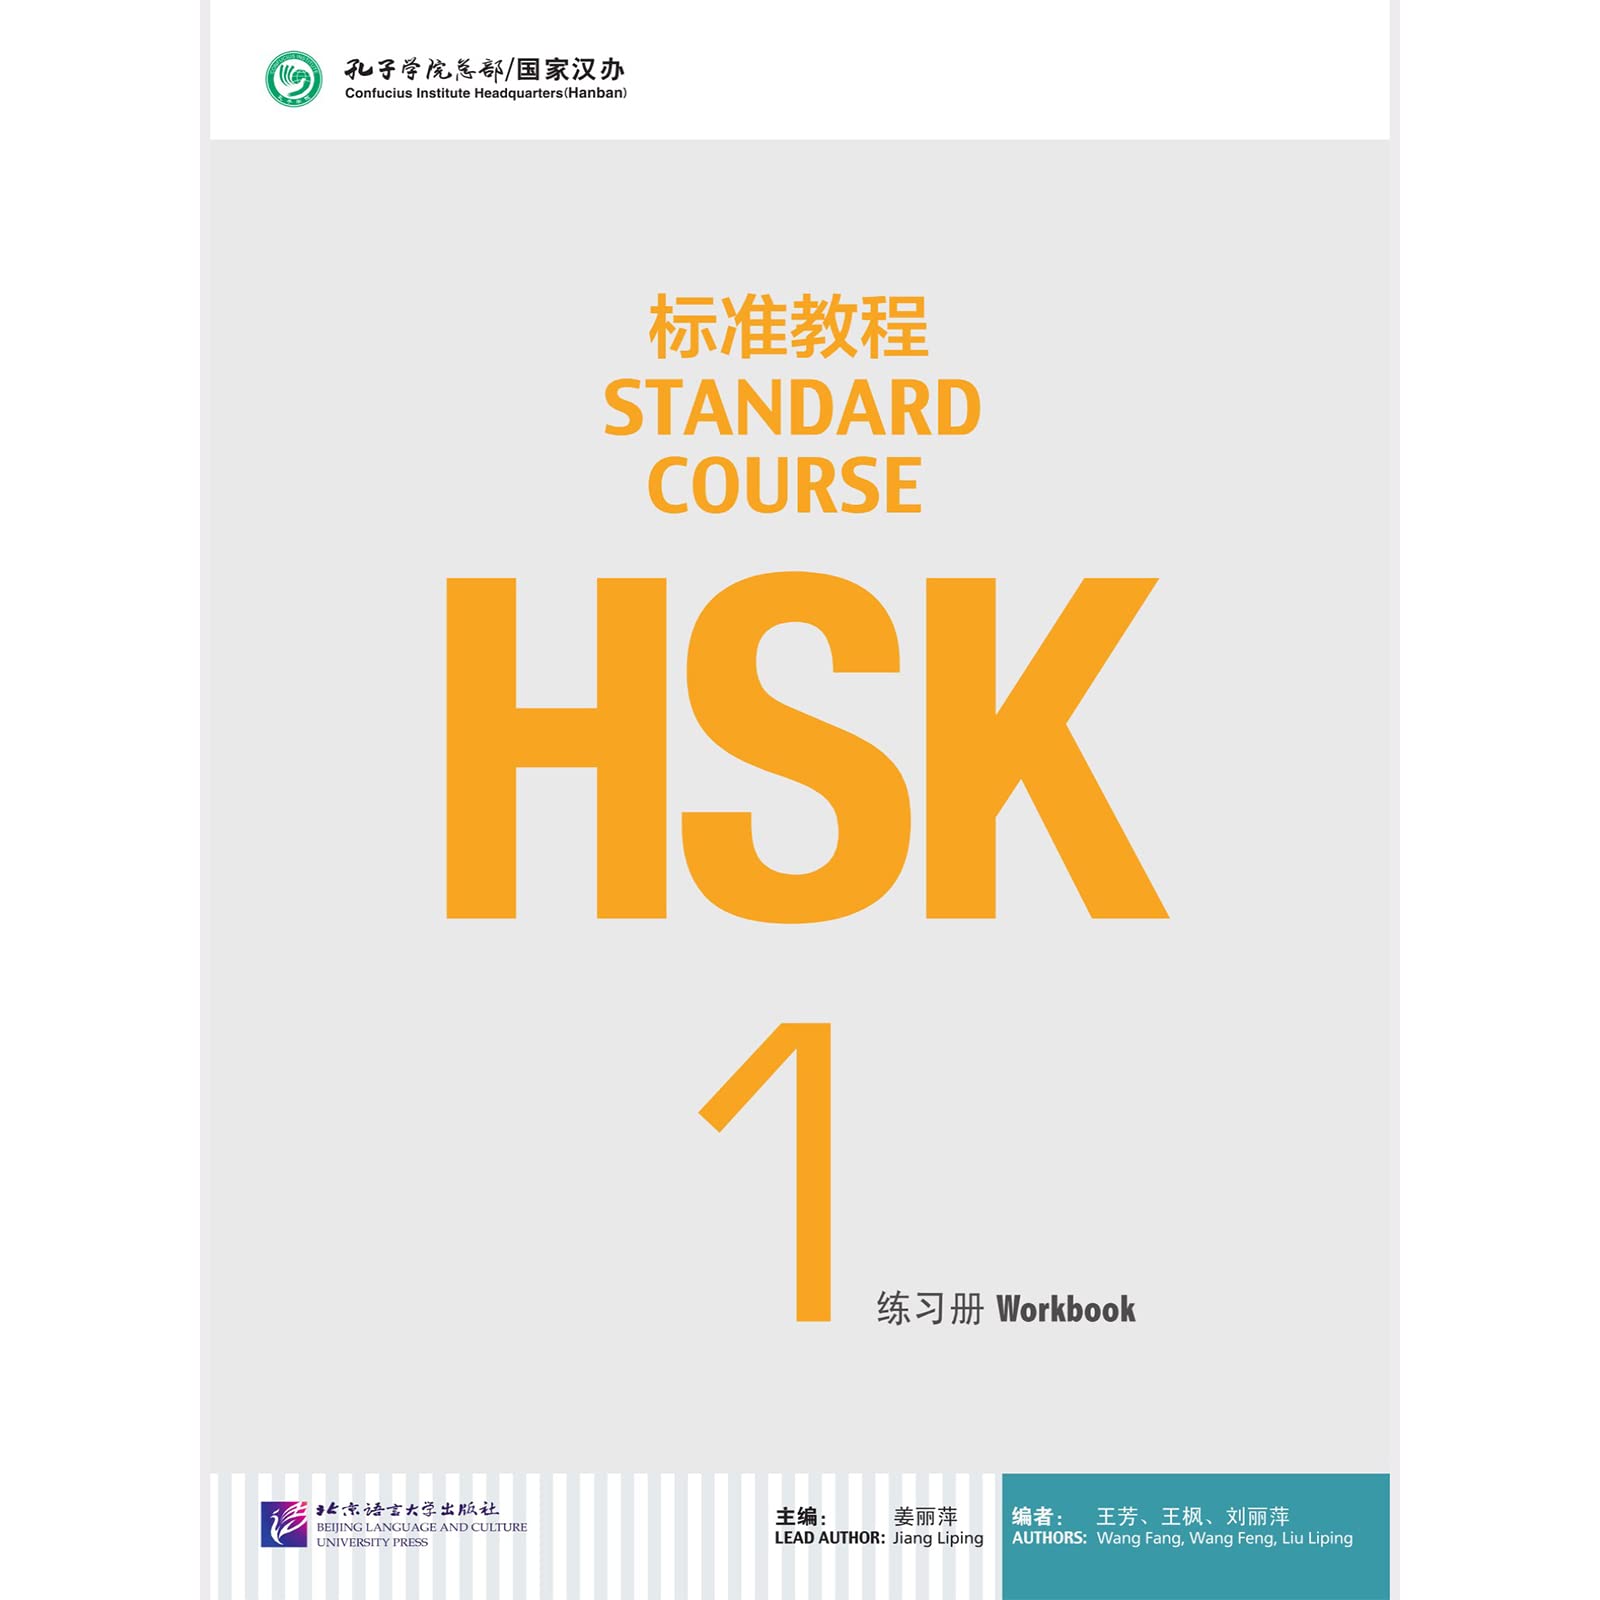 HSK Standard Course 1 SET - Textbook +Workbook (Chinese and English Edition)